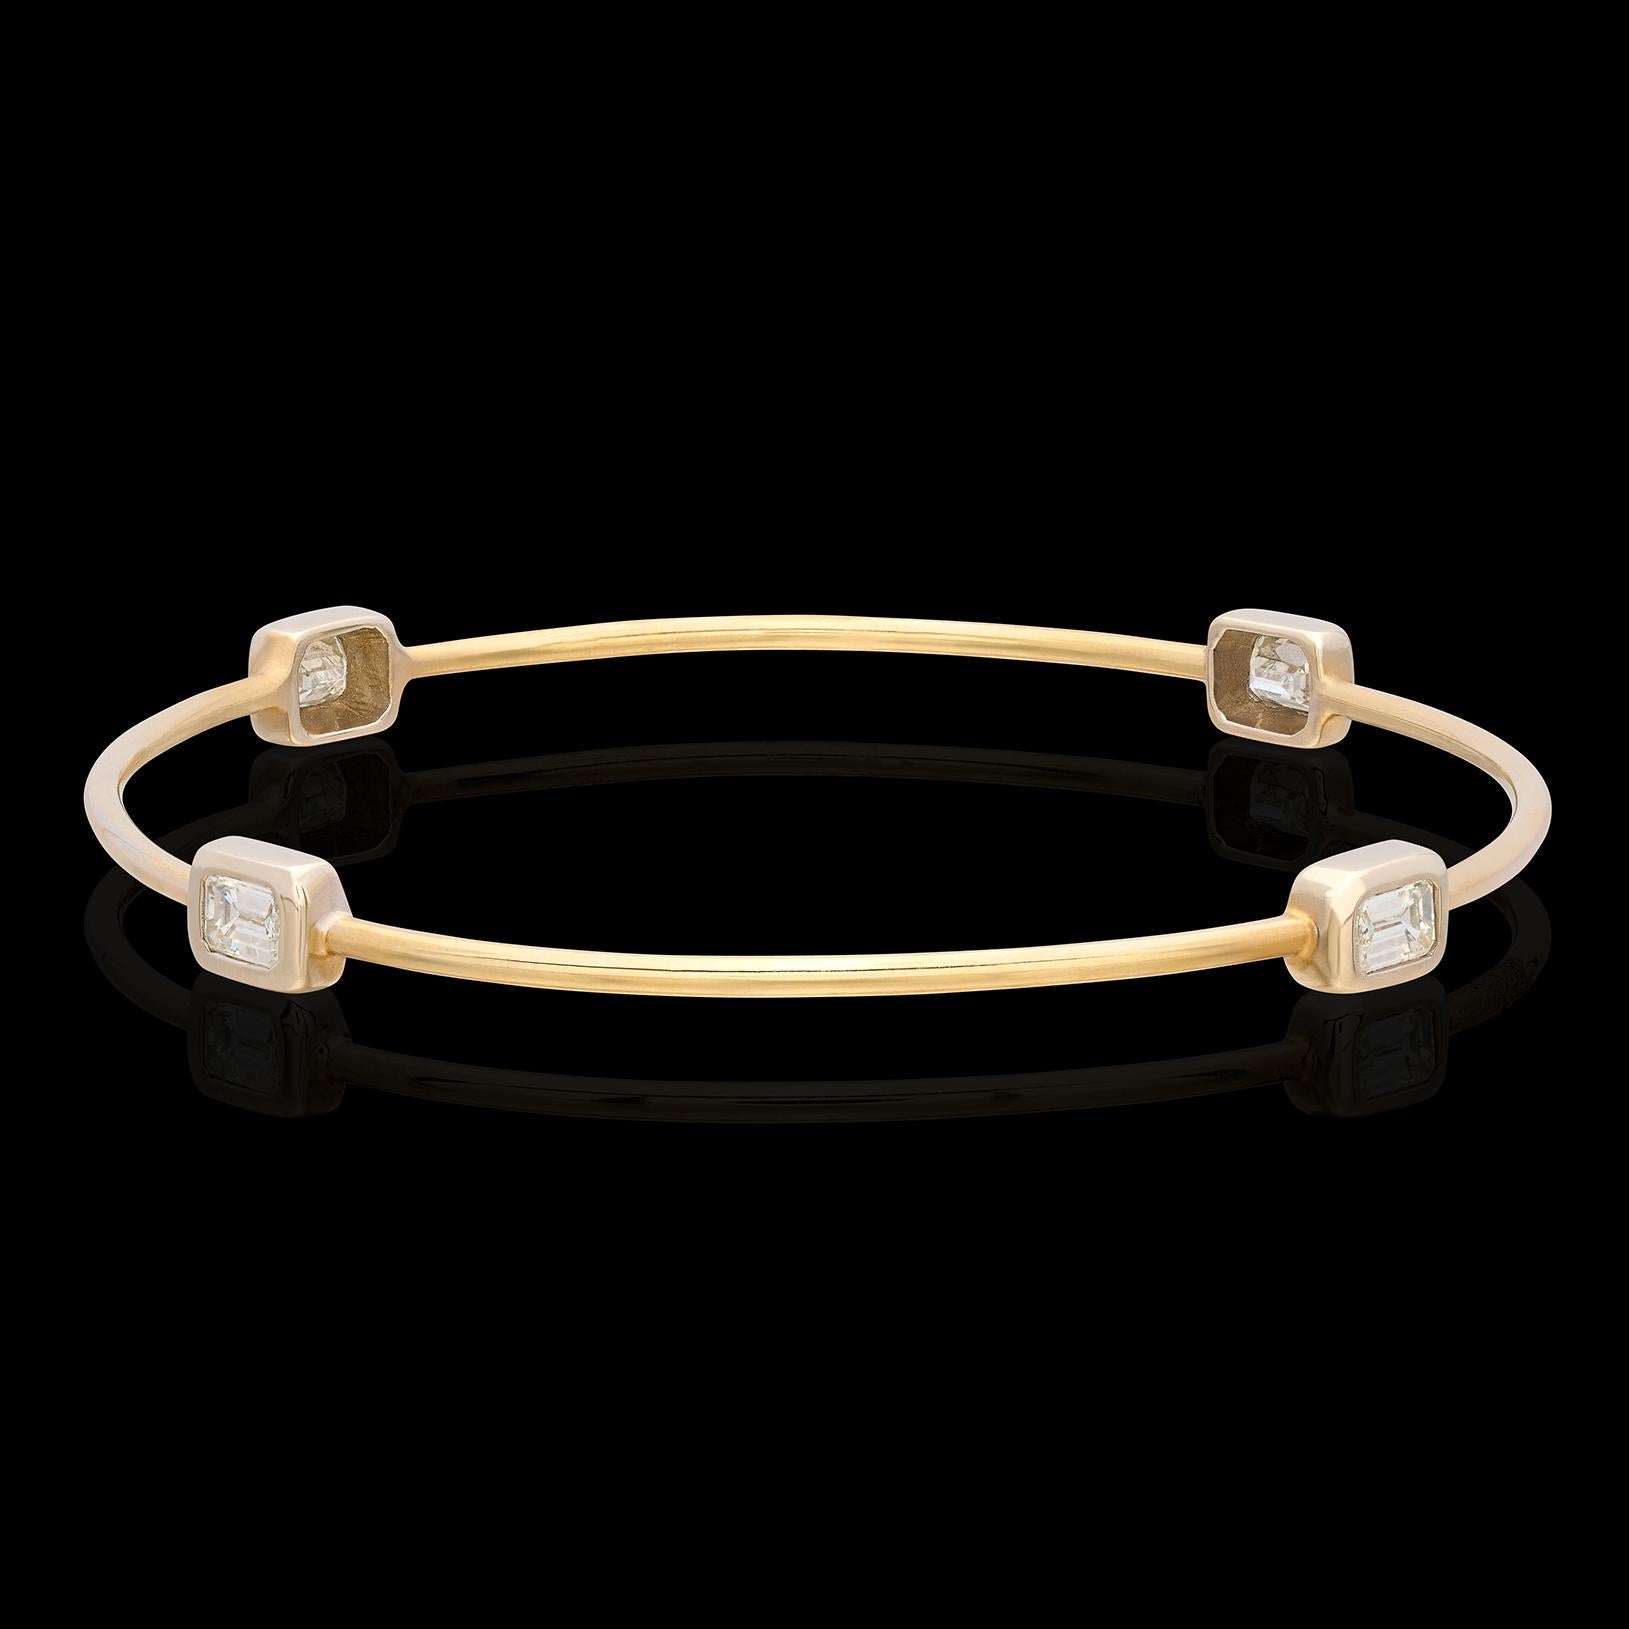 This fun, stackable 18k bi-color gold bangle bracelet is a great addition to a collection. Designed with four emerald-cut diamonds set on the compass points, weighing together 1.58 carats, it's eye catching enough to wear on it's own, and also a